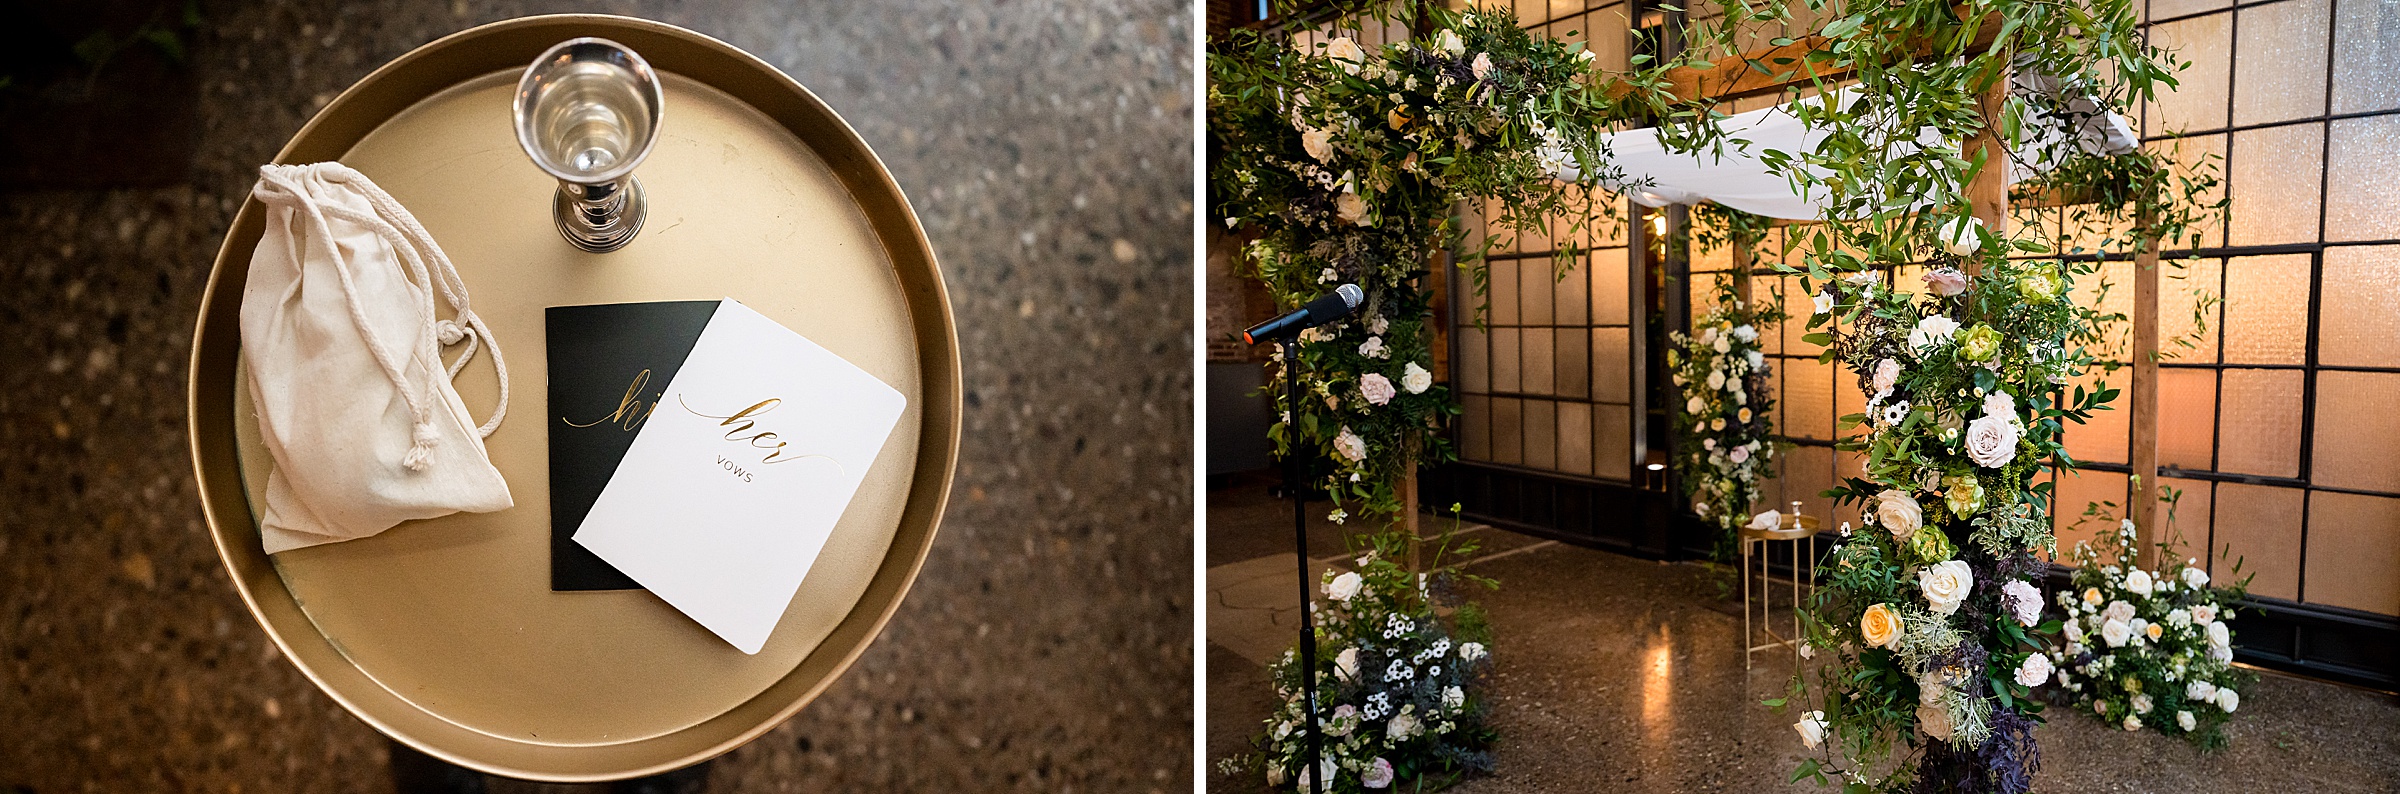 Two pictures of a wedding ceremony with flowers and a gold plate, captured by Lilah Events.